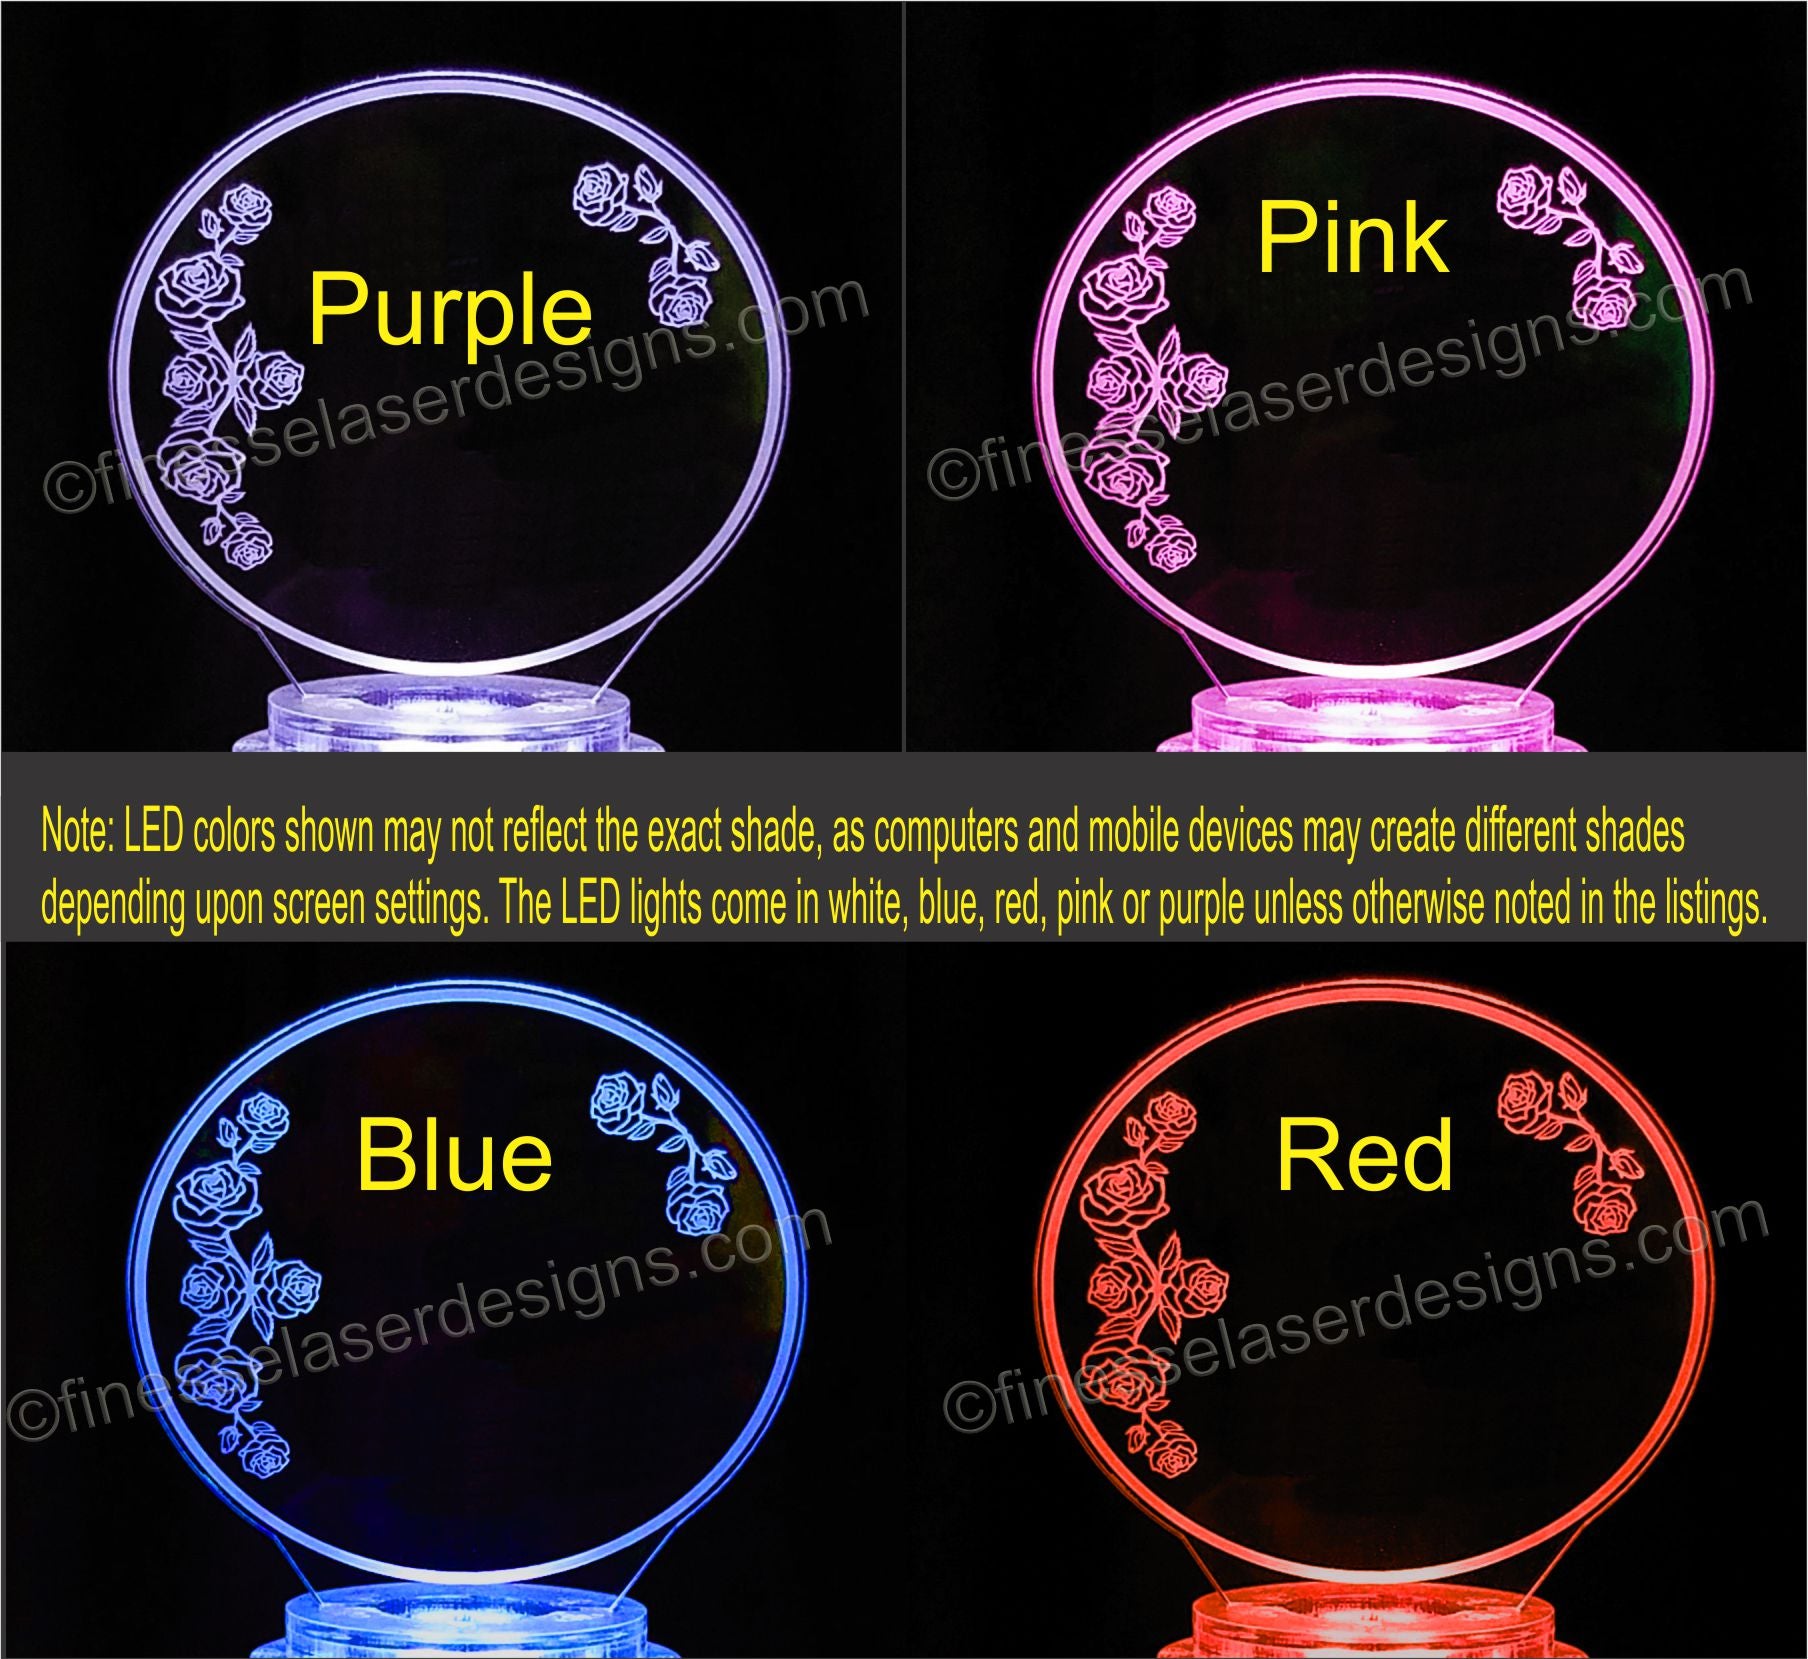 Colored views of acrylic cake topper designed with roses showing pink, purple, blue, and red lighted views